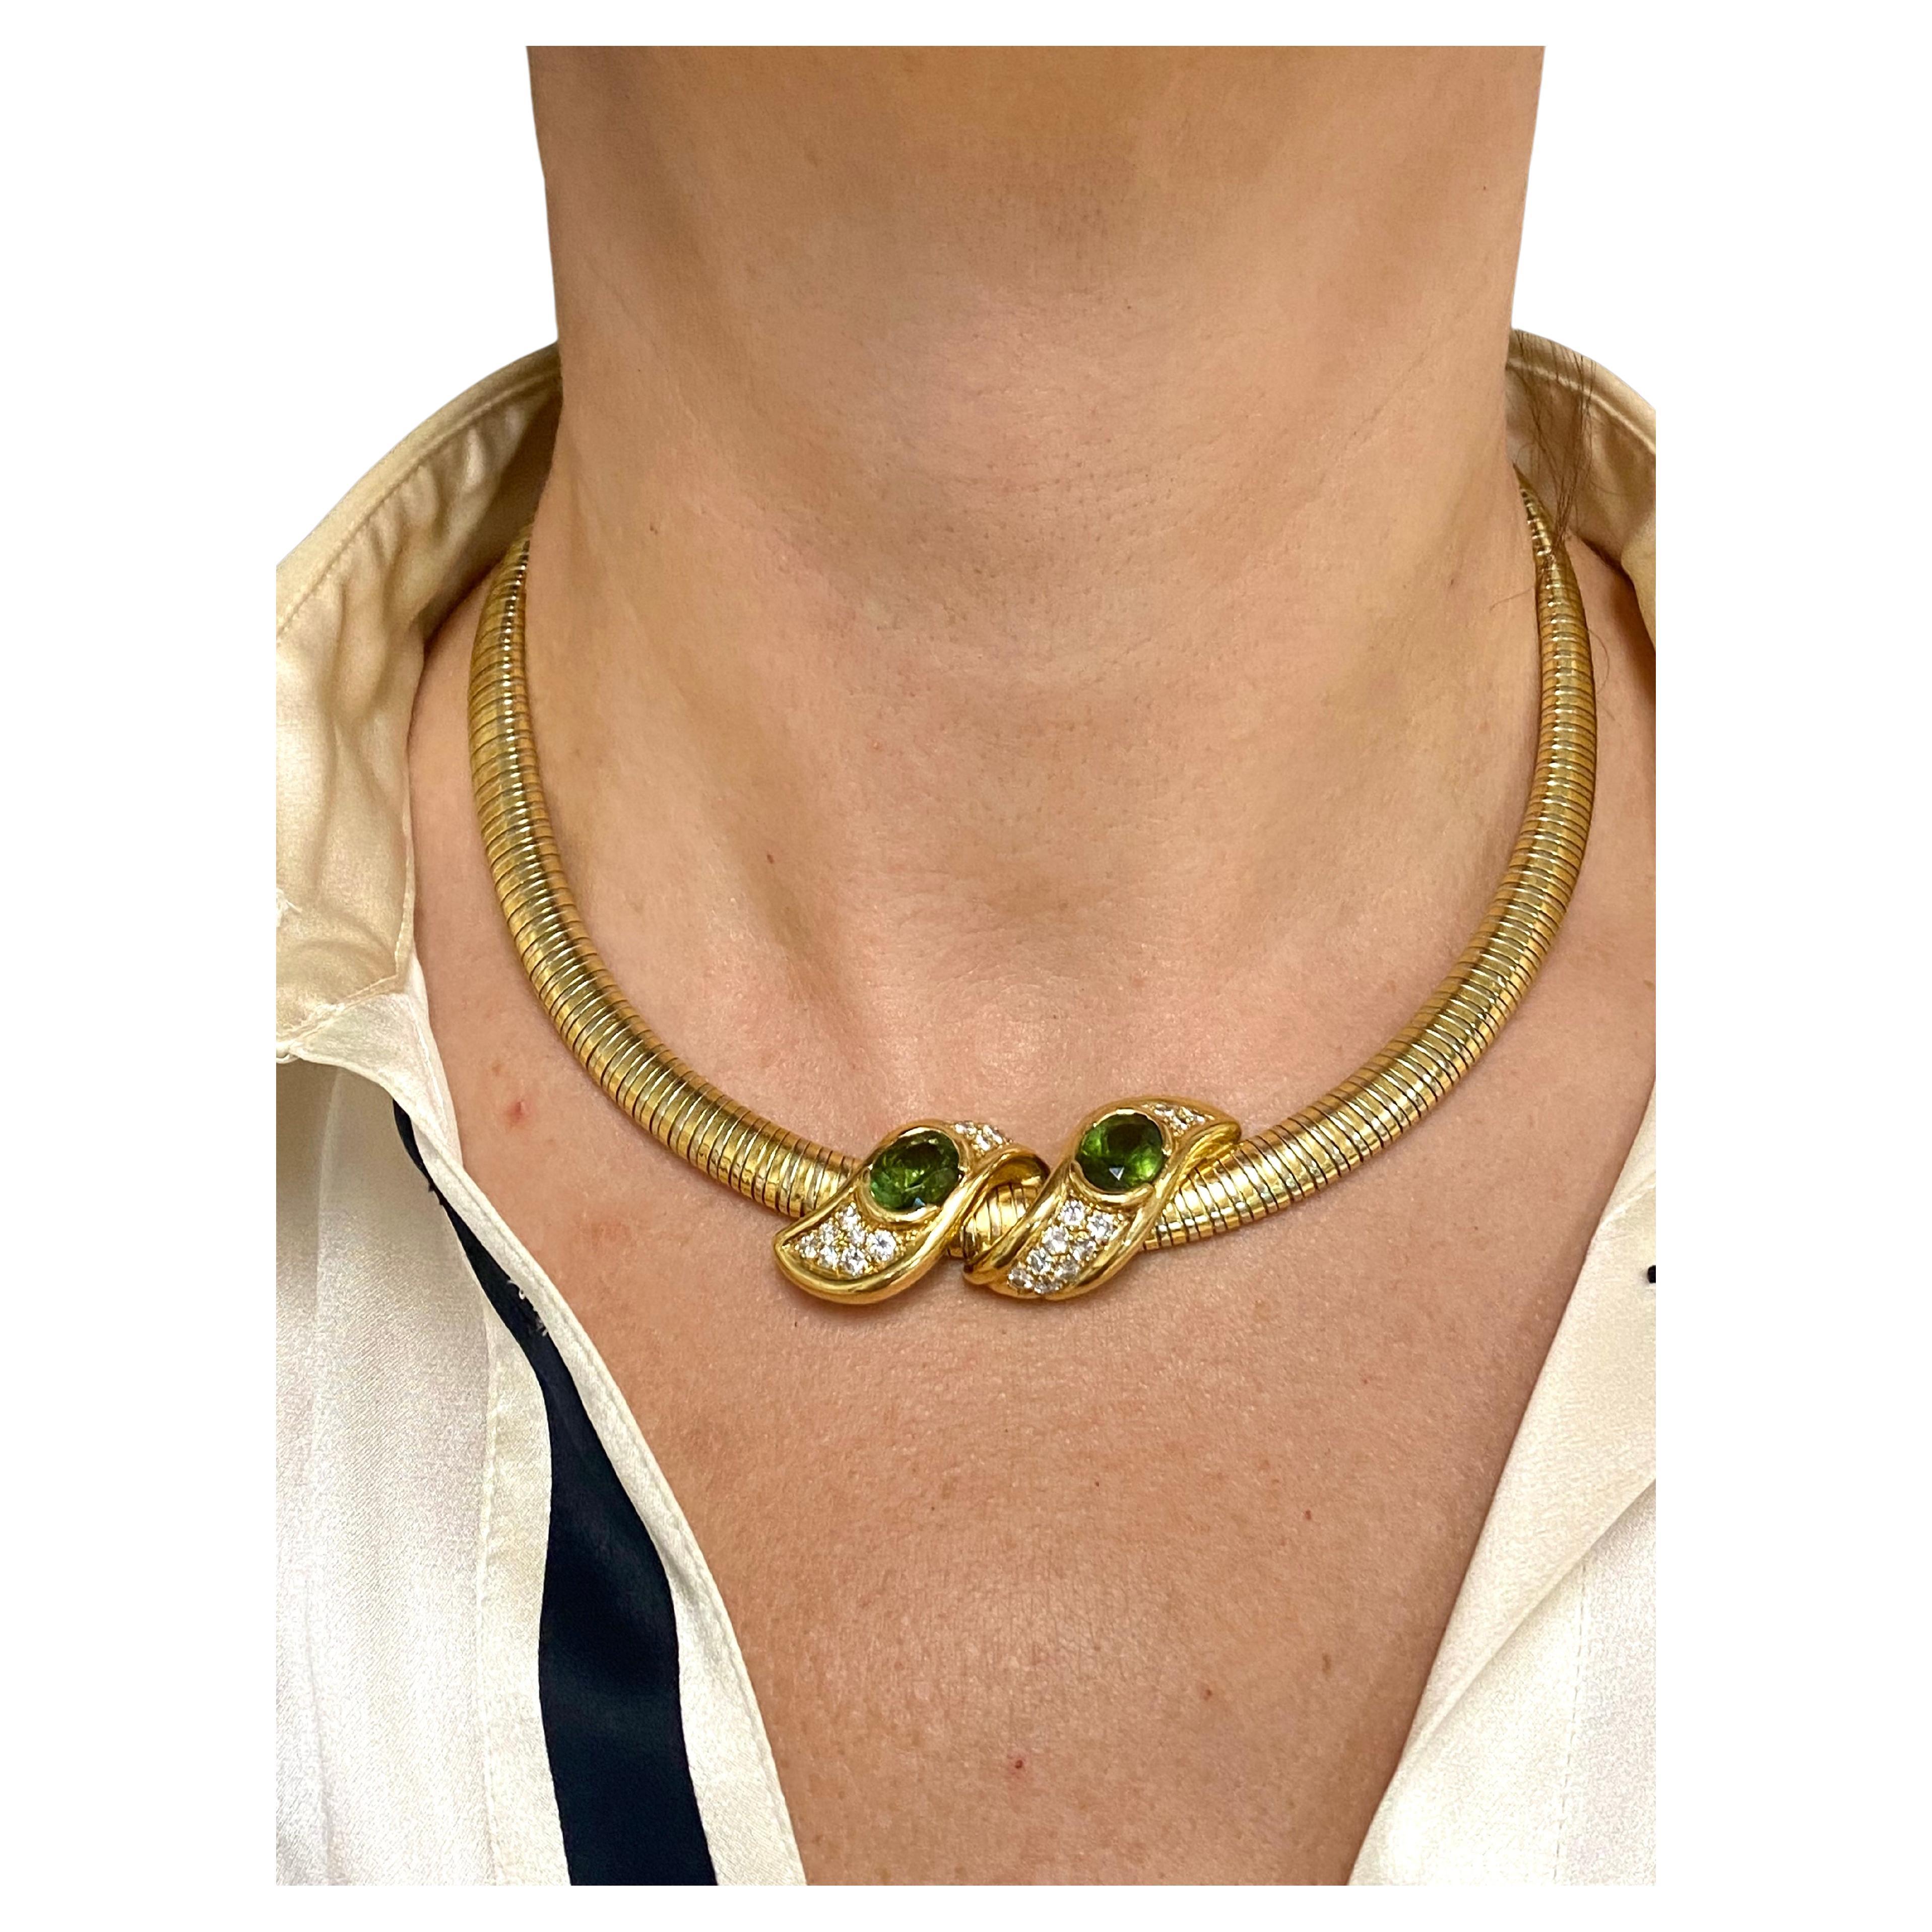 DESIGNER: René Boivin
CIRCA: Late 20th Century
MATERIALS: 18K Yellow and White Gold
GEMSTONE: Peridot, Diamond 
WEIGHT: 68.6 grams
MEASUREMENTS: 17” x 5/16” 
HALLMARKS: René Boivin

A unique vintage necklace by Rene Boivin of Tubogas design. Made of